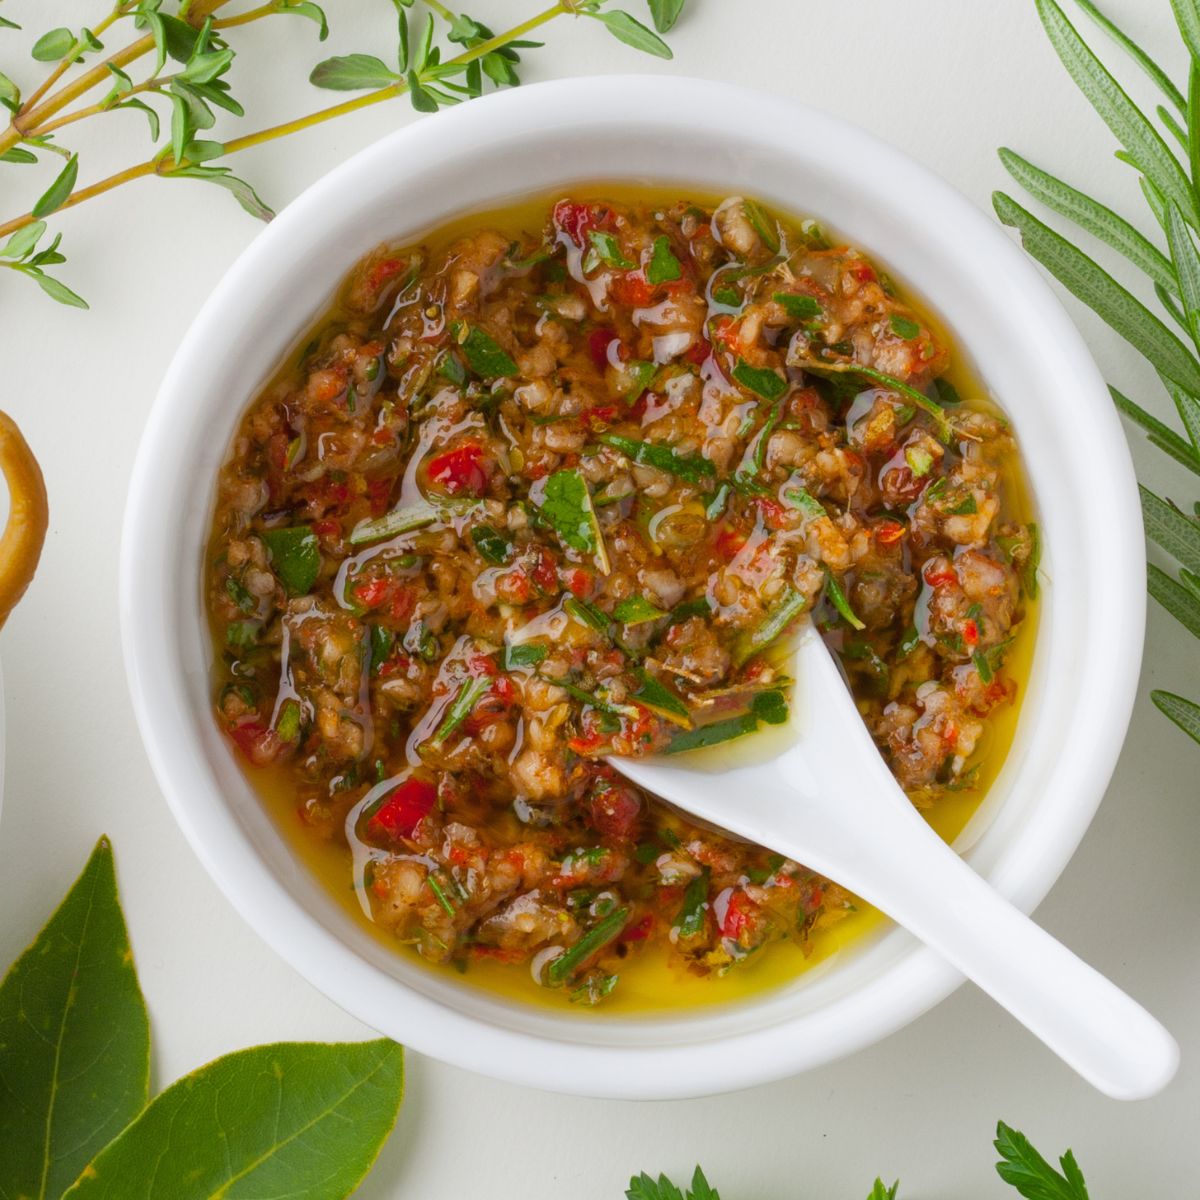 Cilantro-infused chimichurri sauce in a bowl